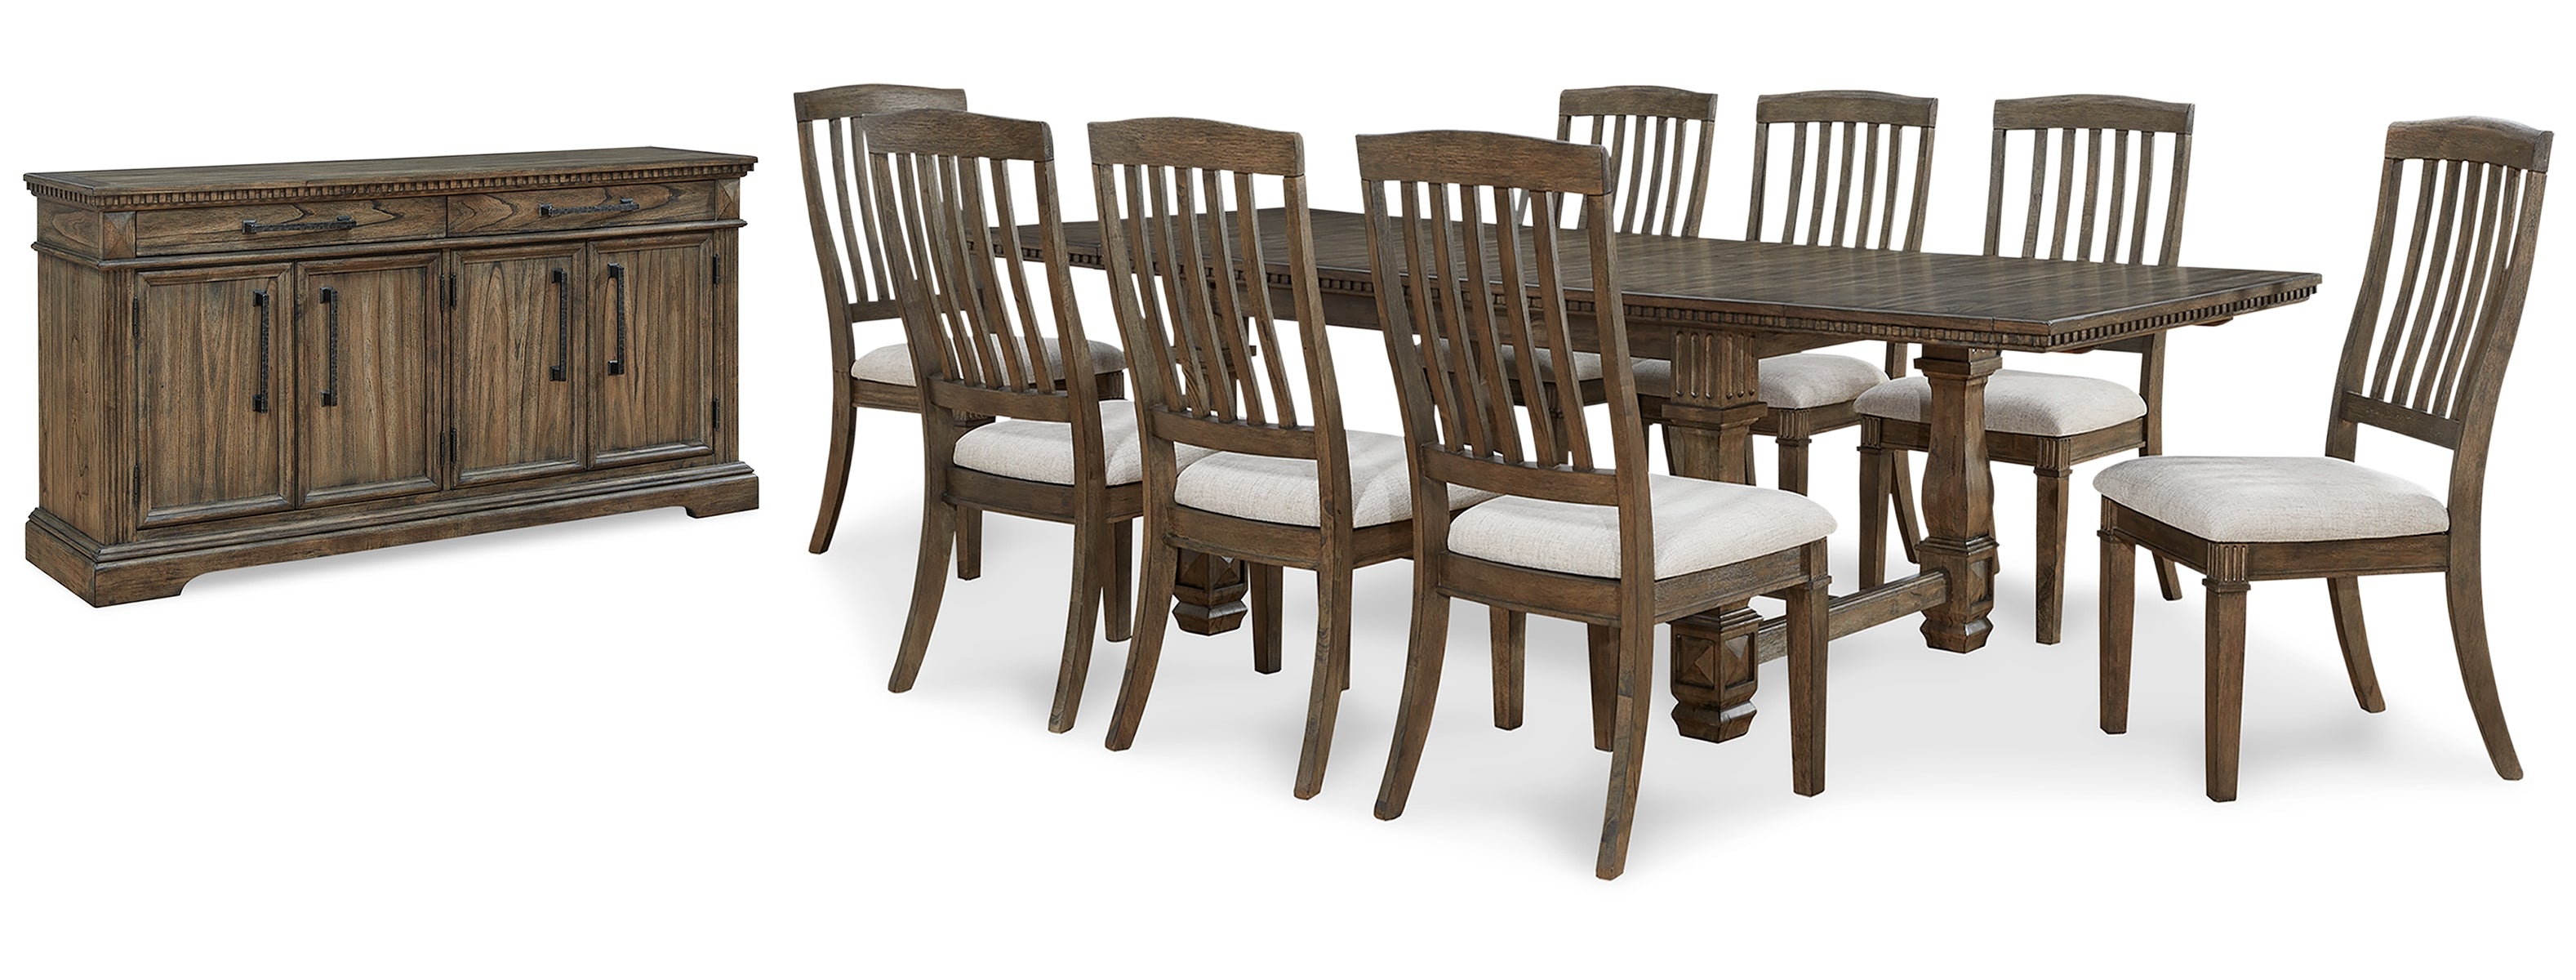 Markenburg Dining Table and 8 Chairs with Storage